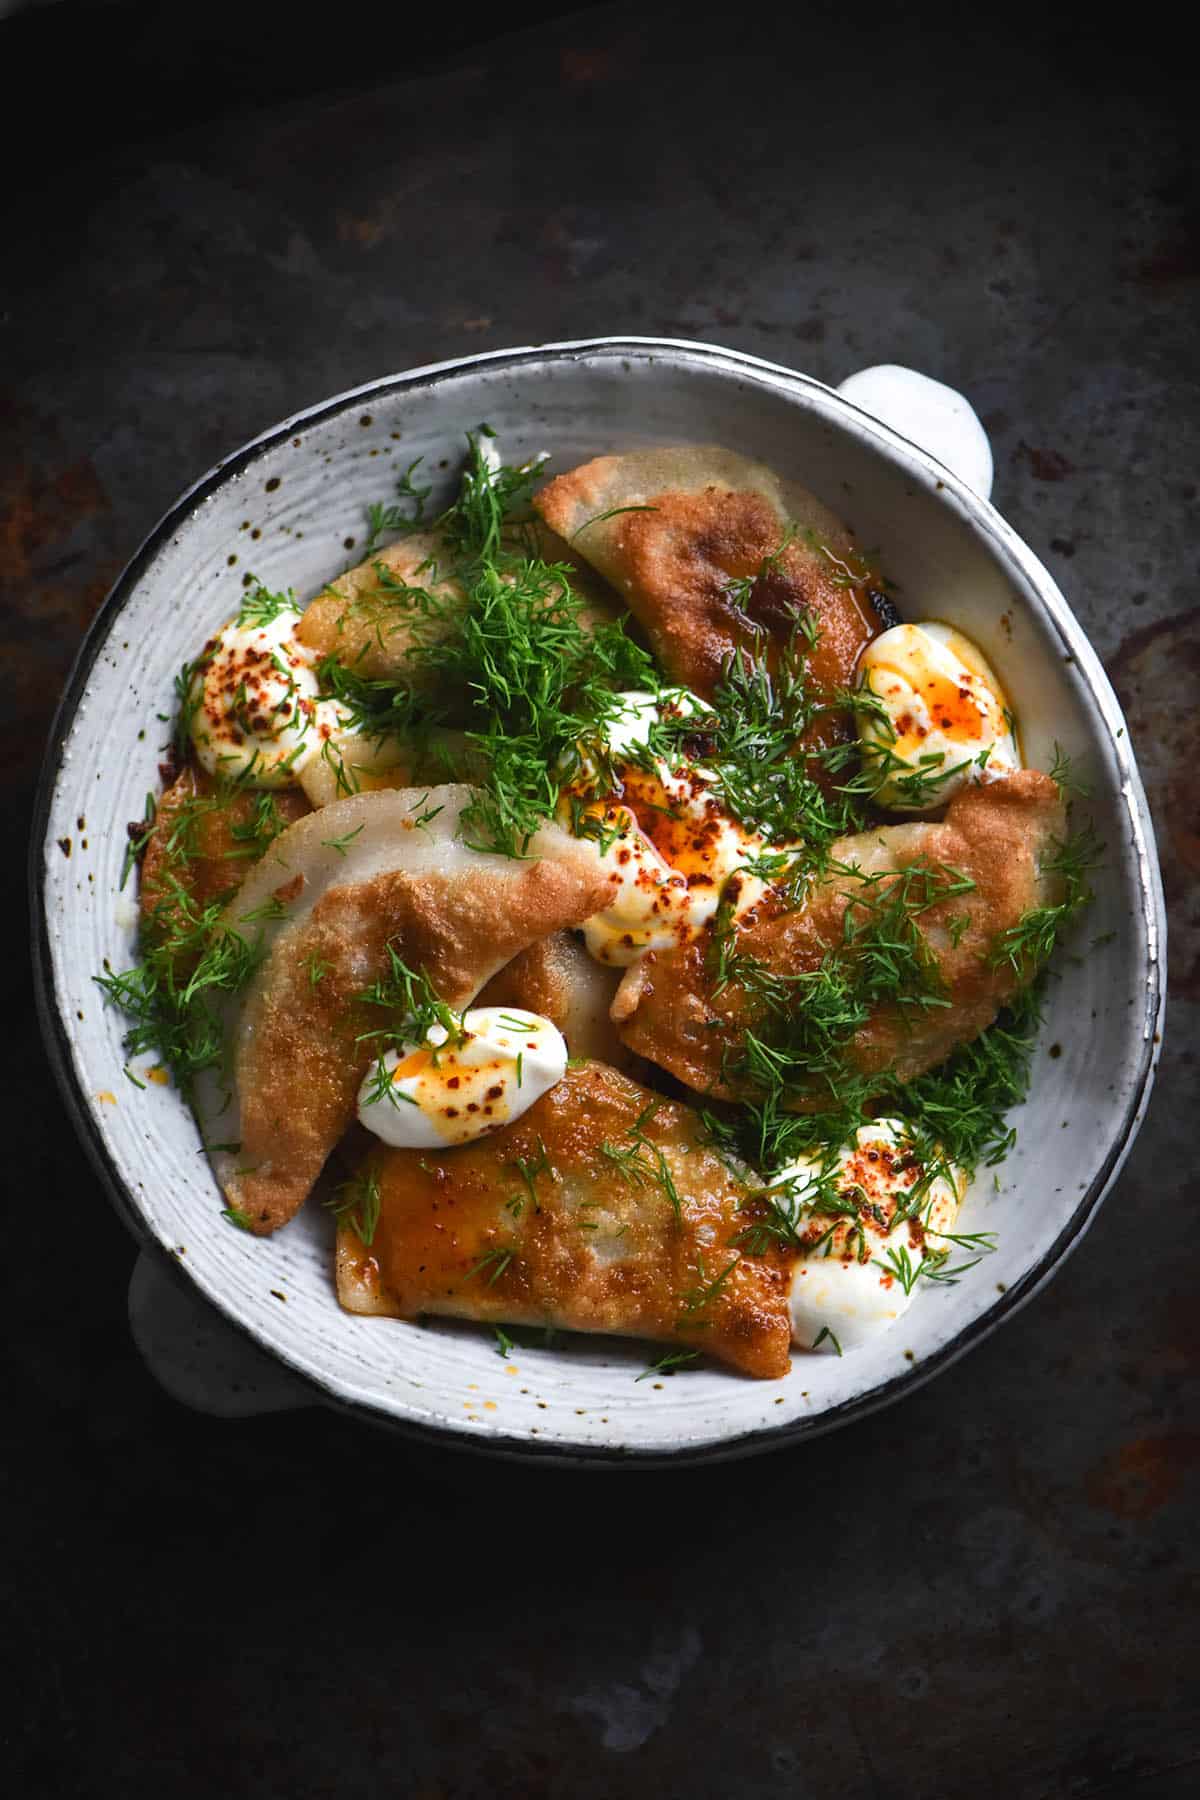 An aerial view of a white ceramic bowl filled with gluten free Varenkyky with a potato and cheese filling. The dumplings have been pan fried creating crispy golden edges. They are topped with sour cream, dill and chilli oil. The bowl sits atop a dark grey mottled background.